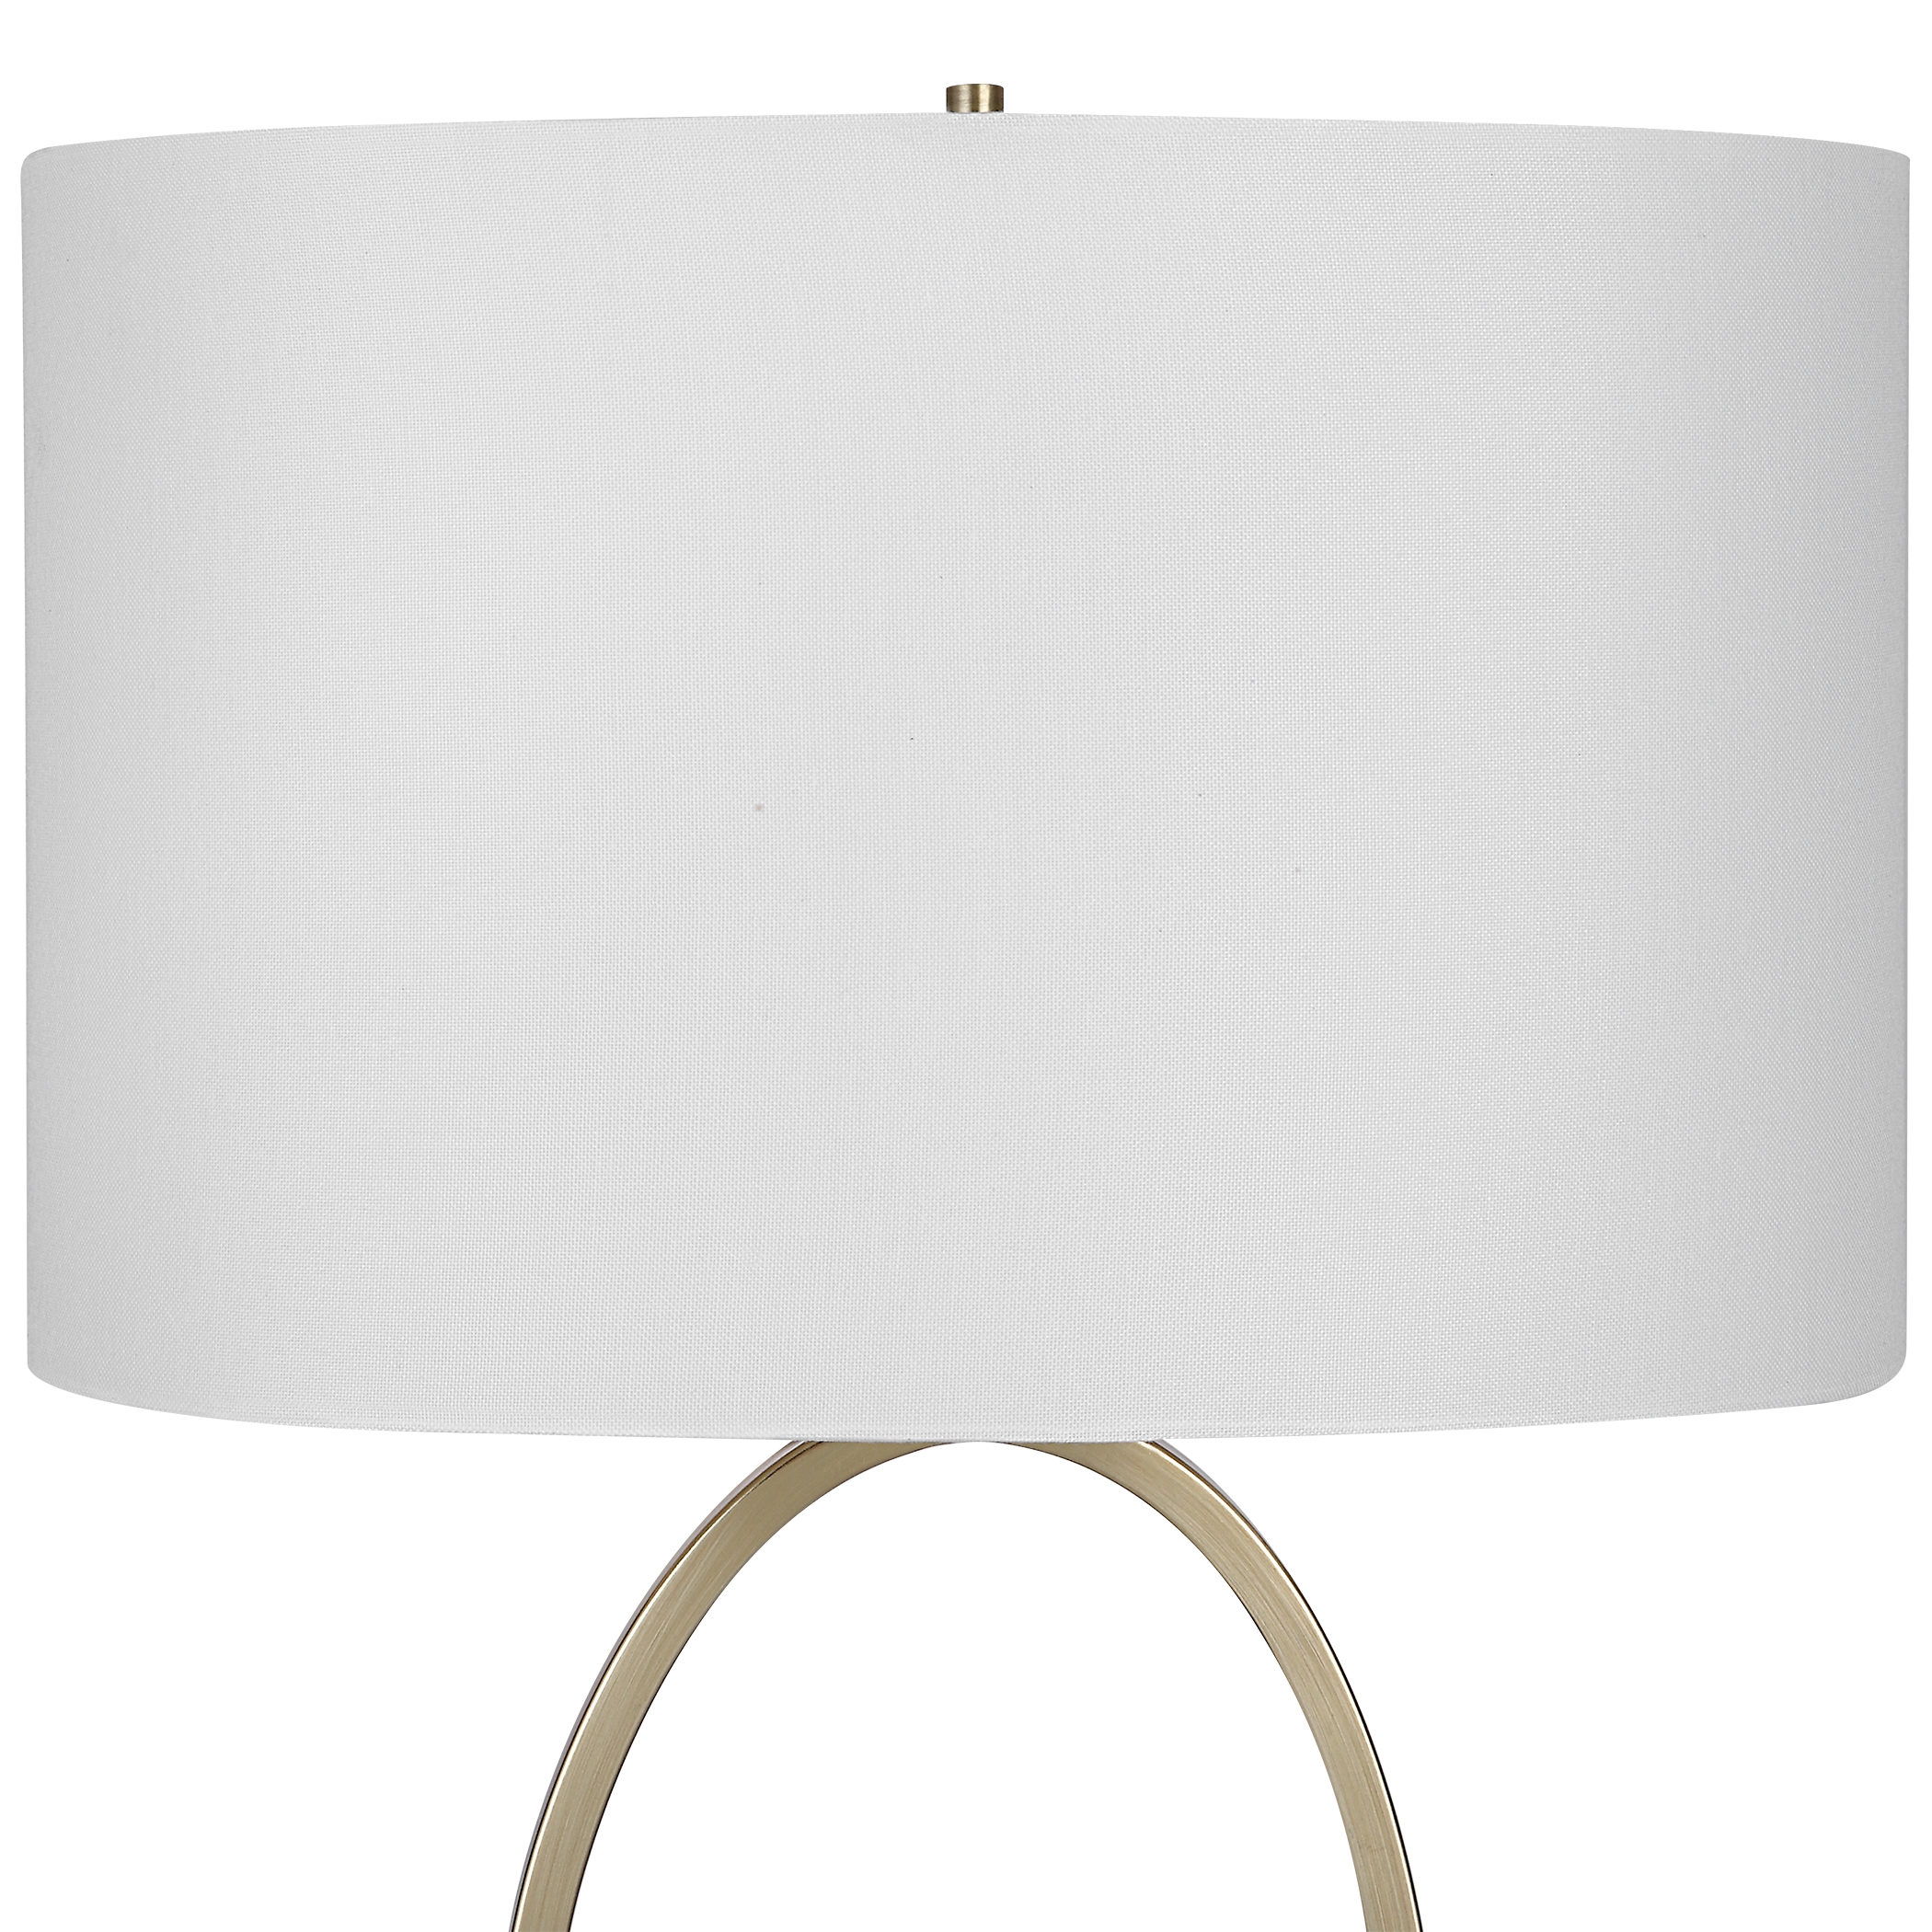 Oval Table Lamp, Gold - Image 2